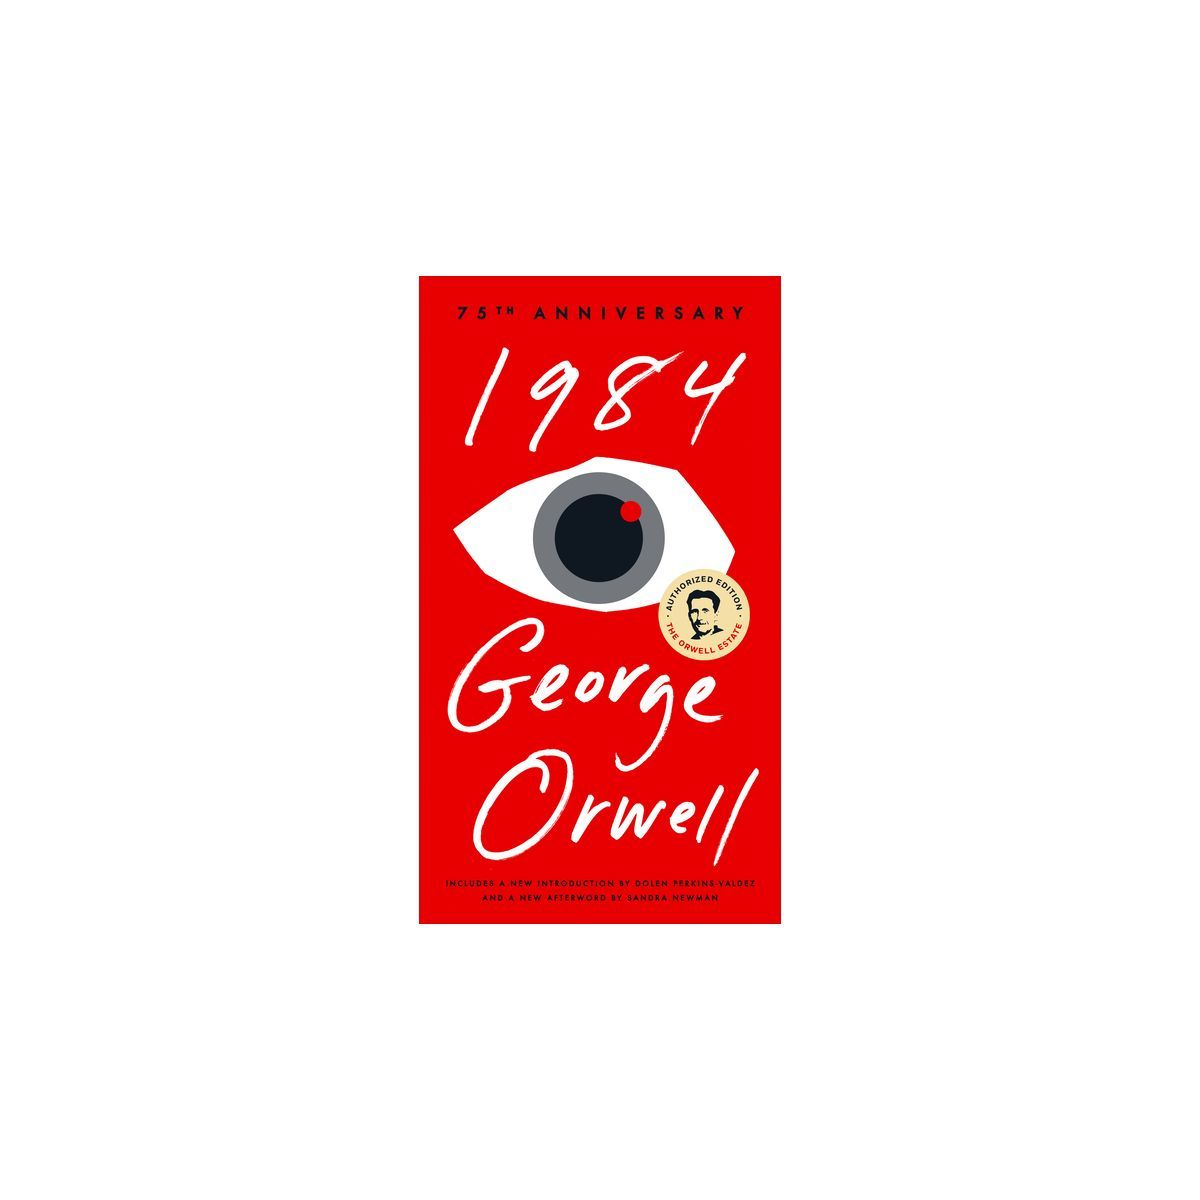 1984 ( Signet Classics) (Reissue) (Paperback) by George Orwell | Target